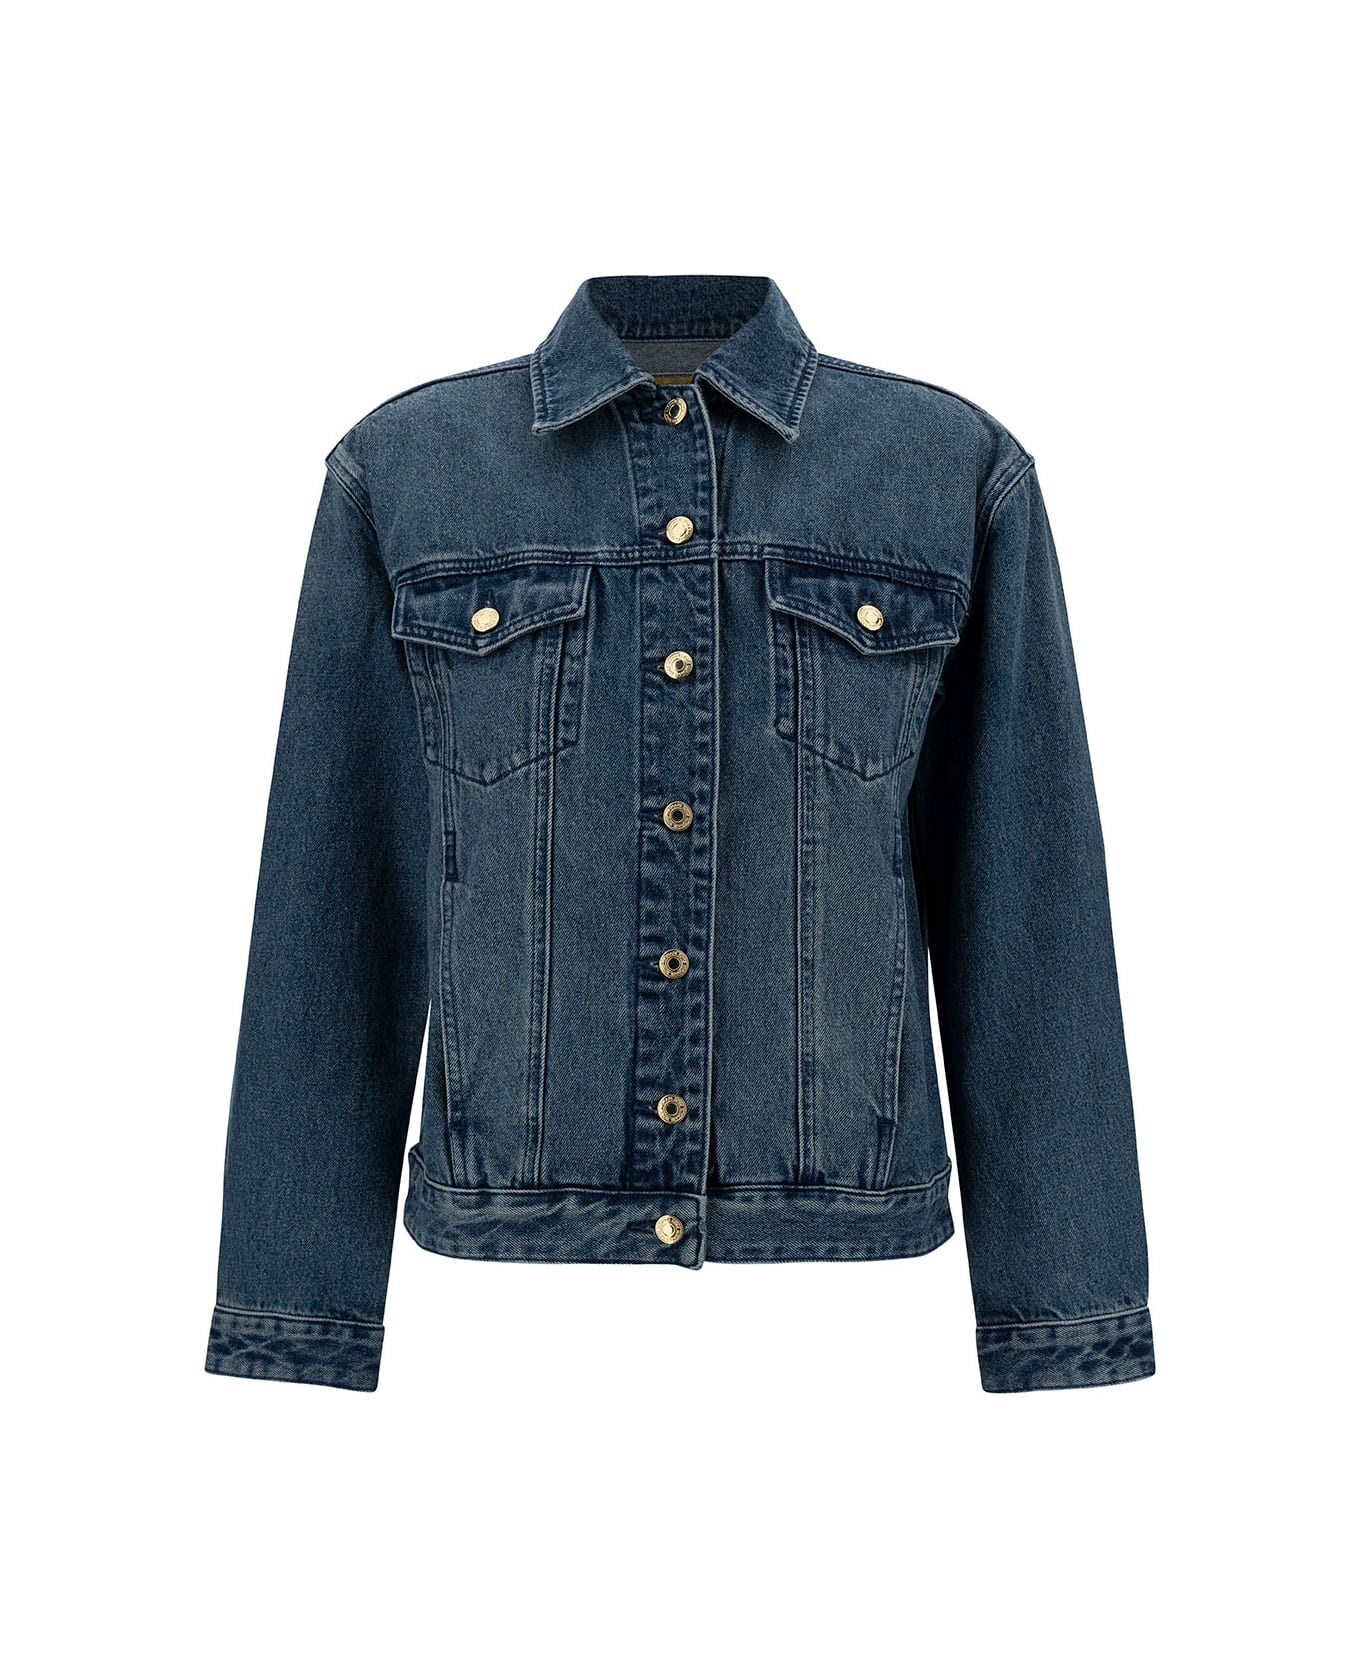 MICHAEL Michael Kors Blue Jacket With Classic Collar And Buttons In Cotton Denim Woman - Blu